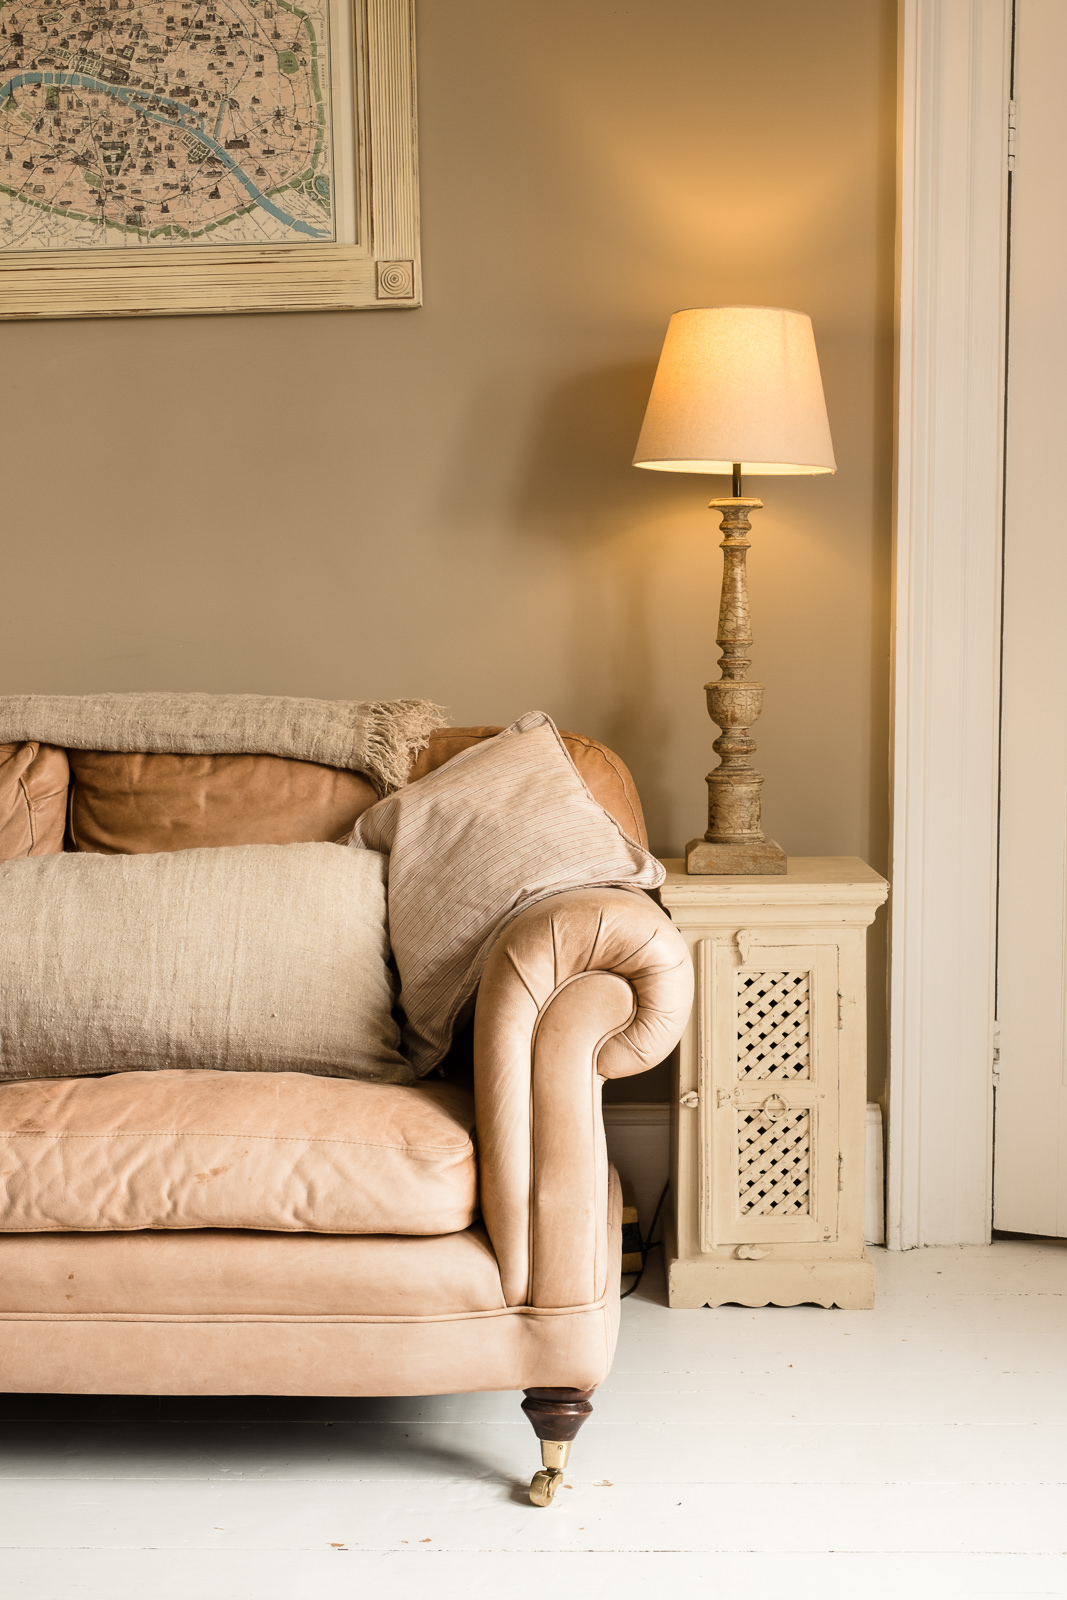 Corporate marketing photography with image showing partial view of a classically designed settee in farmhouse lounge